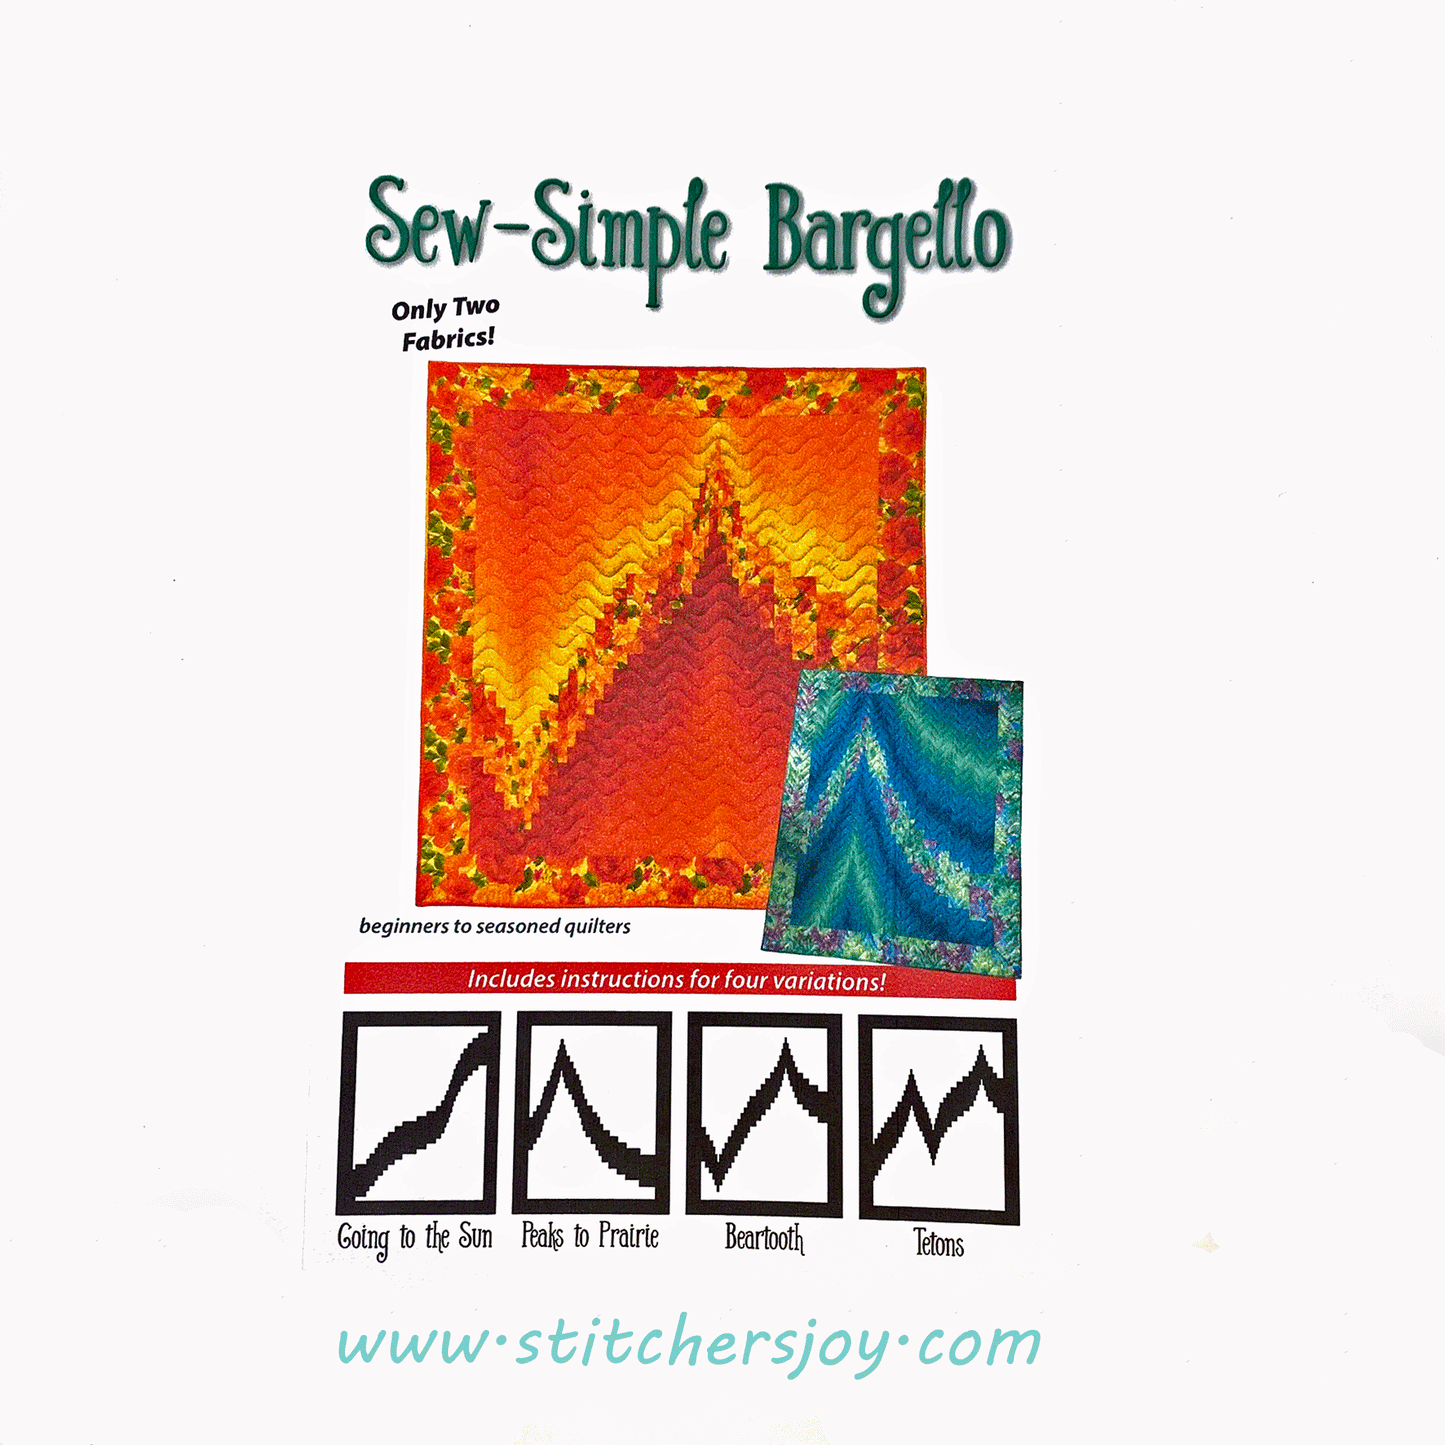 Sew-Simple Bargello Sewing Patterns